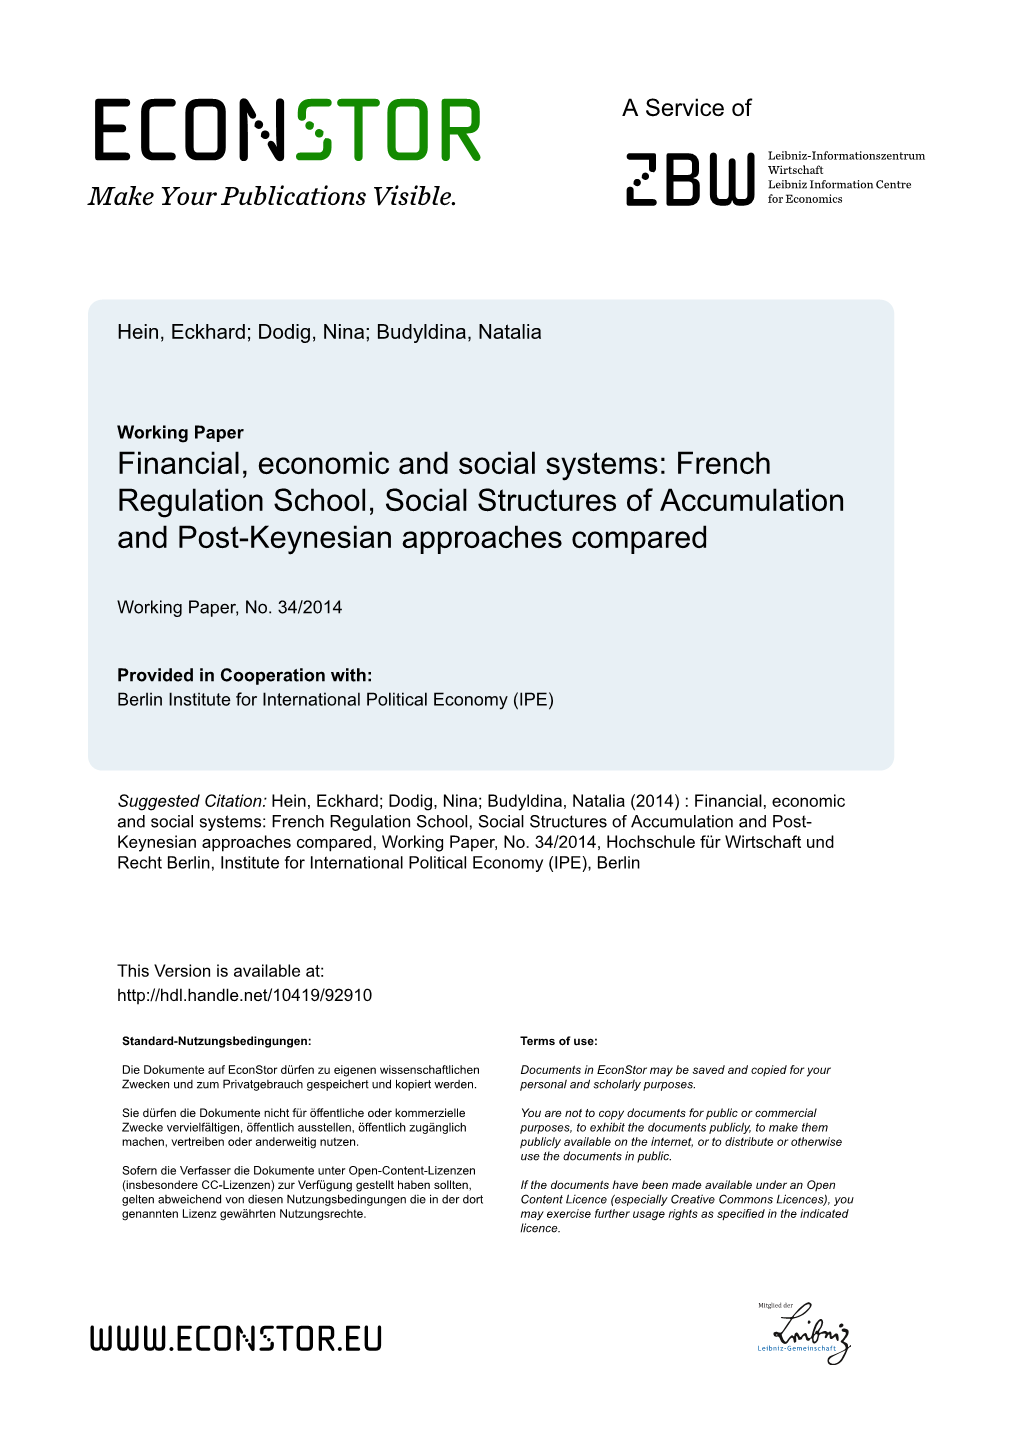 French Regulation School, Social Structures of Accumulation and Post-Keynesian Approaches Compared